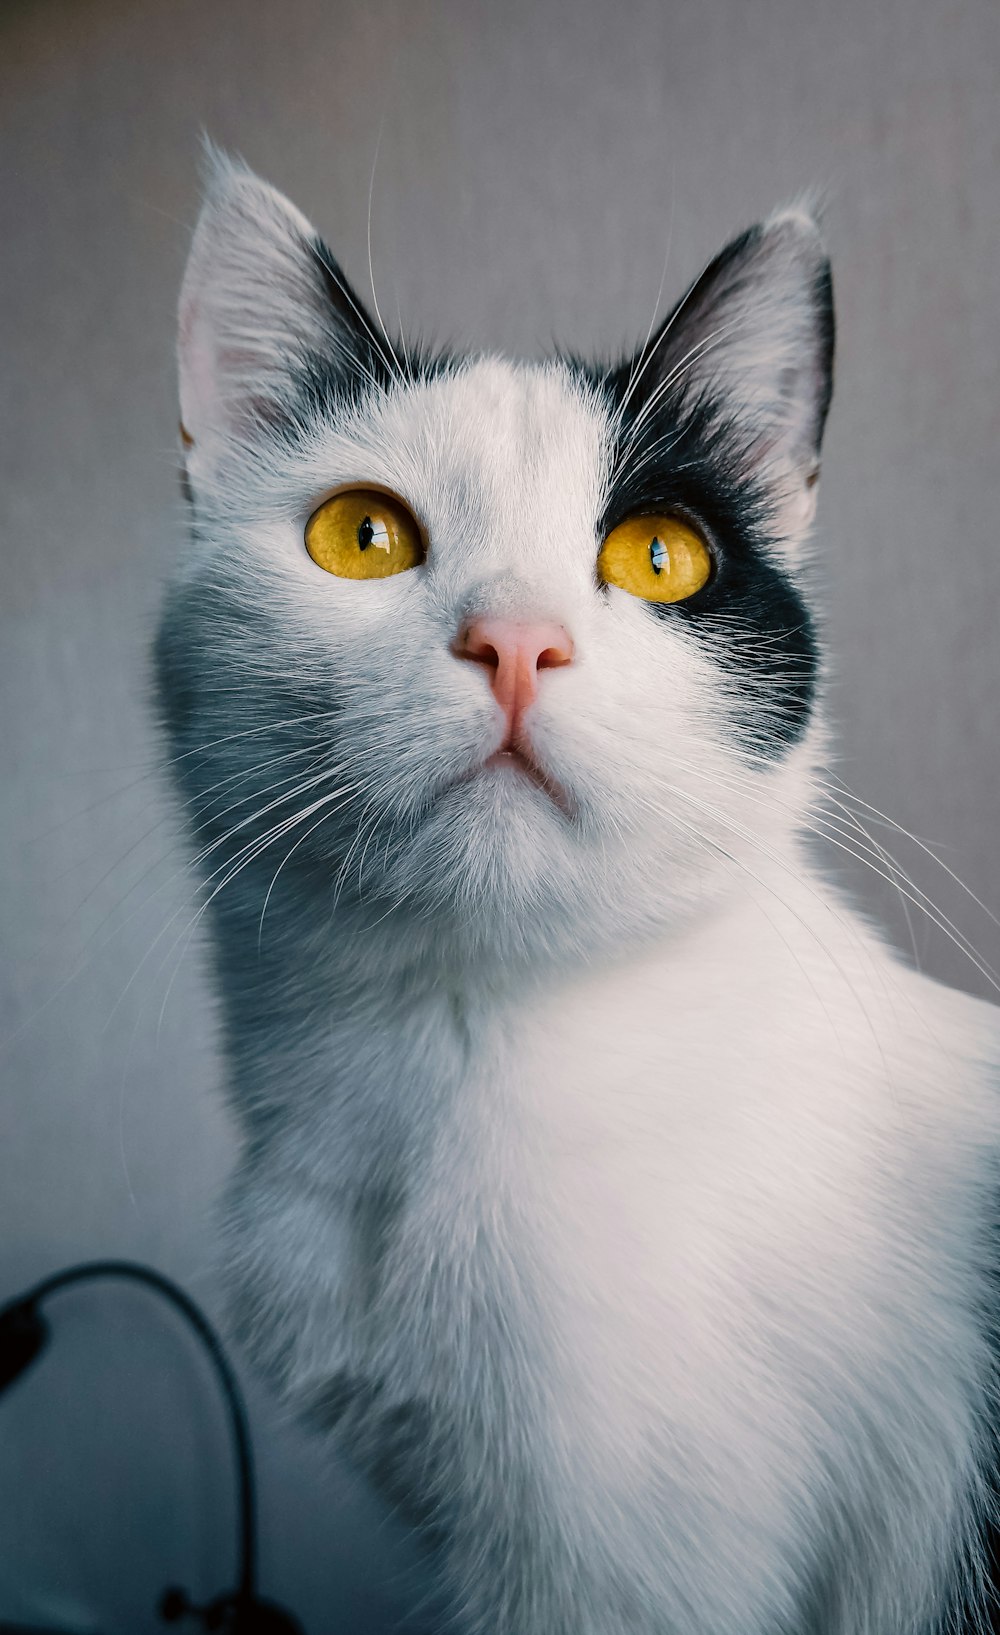 a black and white cat with yellow eyes